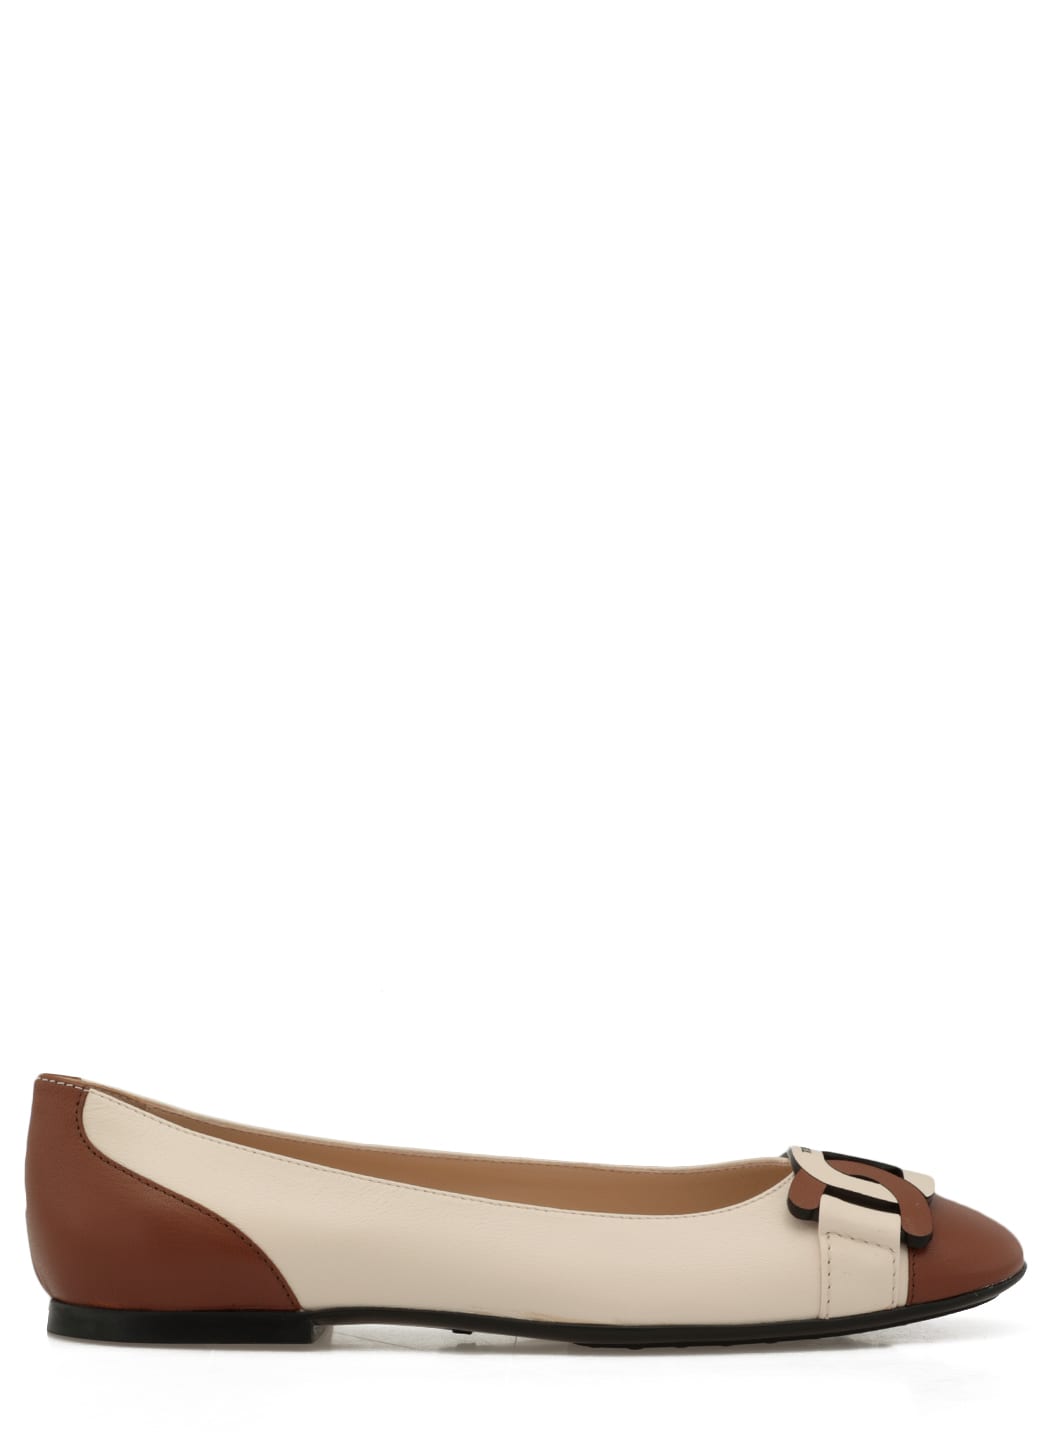 Tods Leather Ballet Shoe